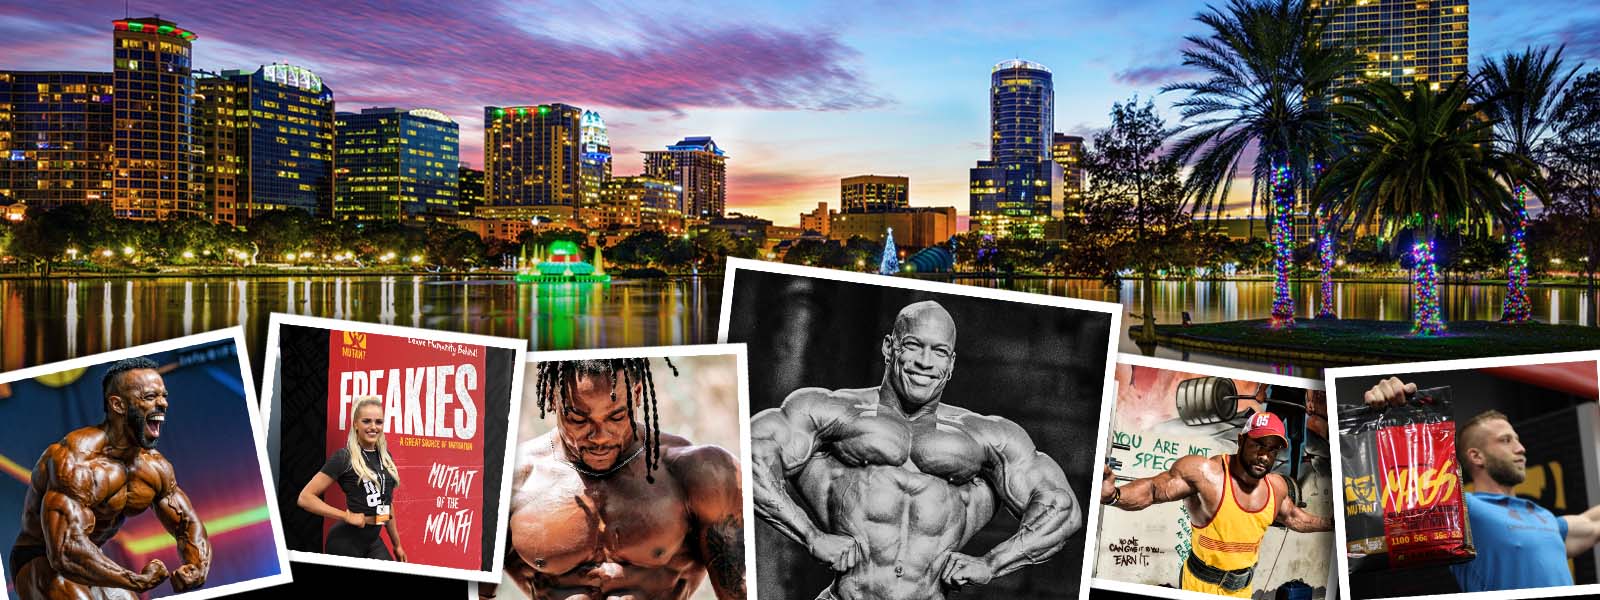 WE’RE ALL-IN ON THE 2021 MR. OLYMPIA, ARE YOU?